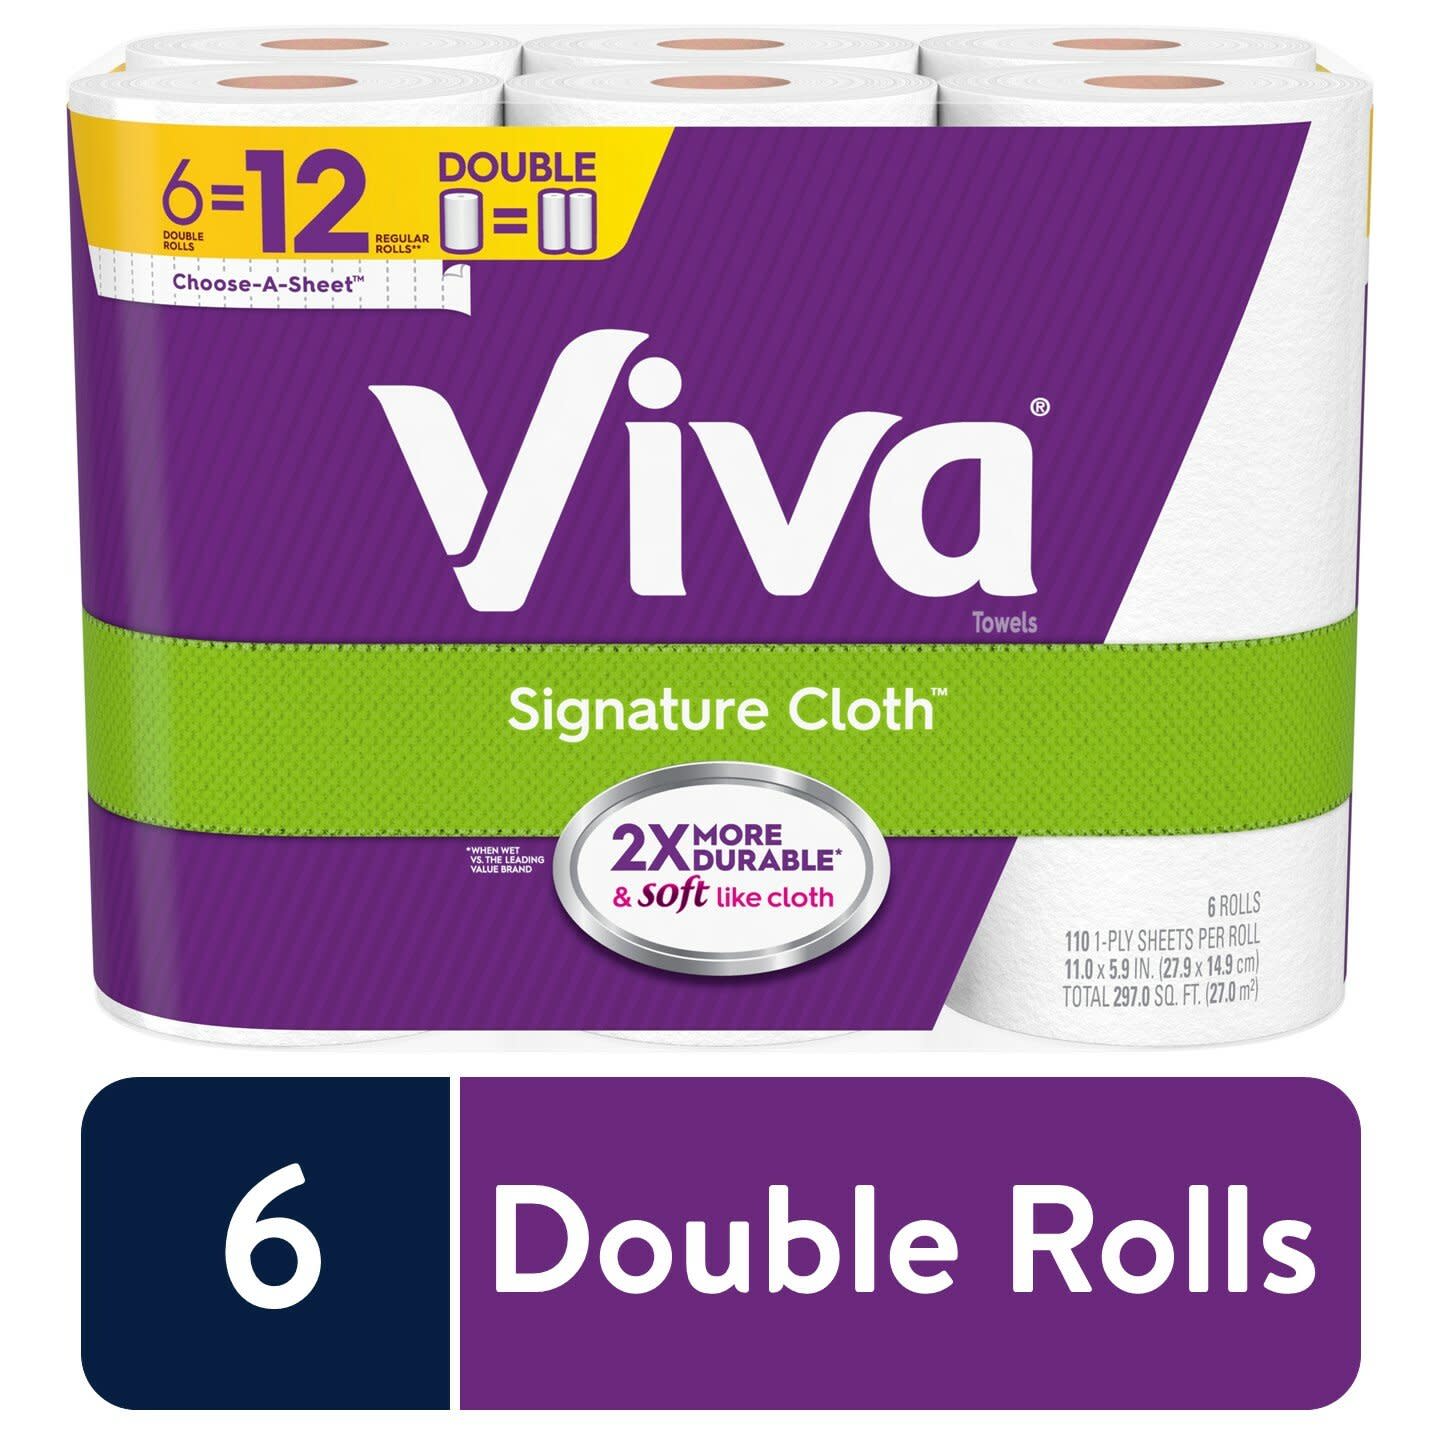 VIVA Choose-A-Sheet* Paper Towels 24 Count Big Plus Roll White